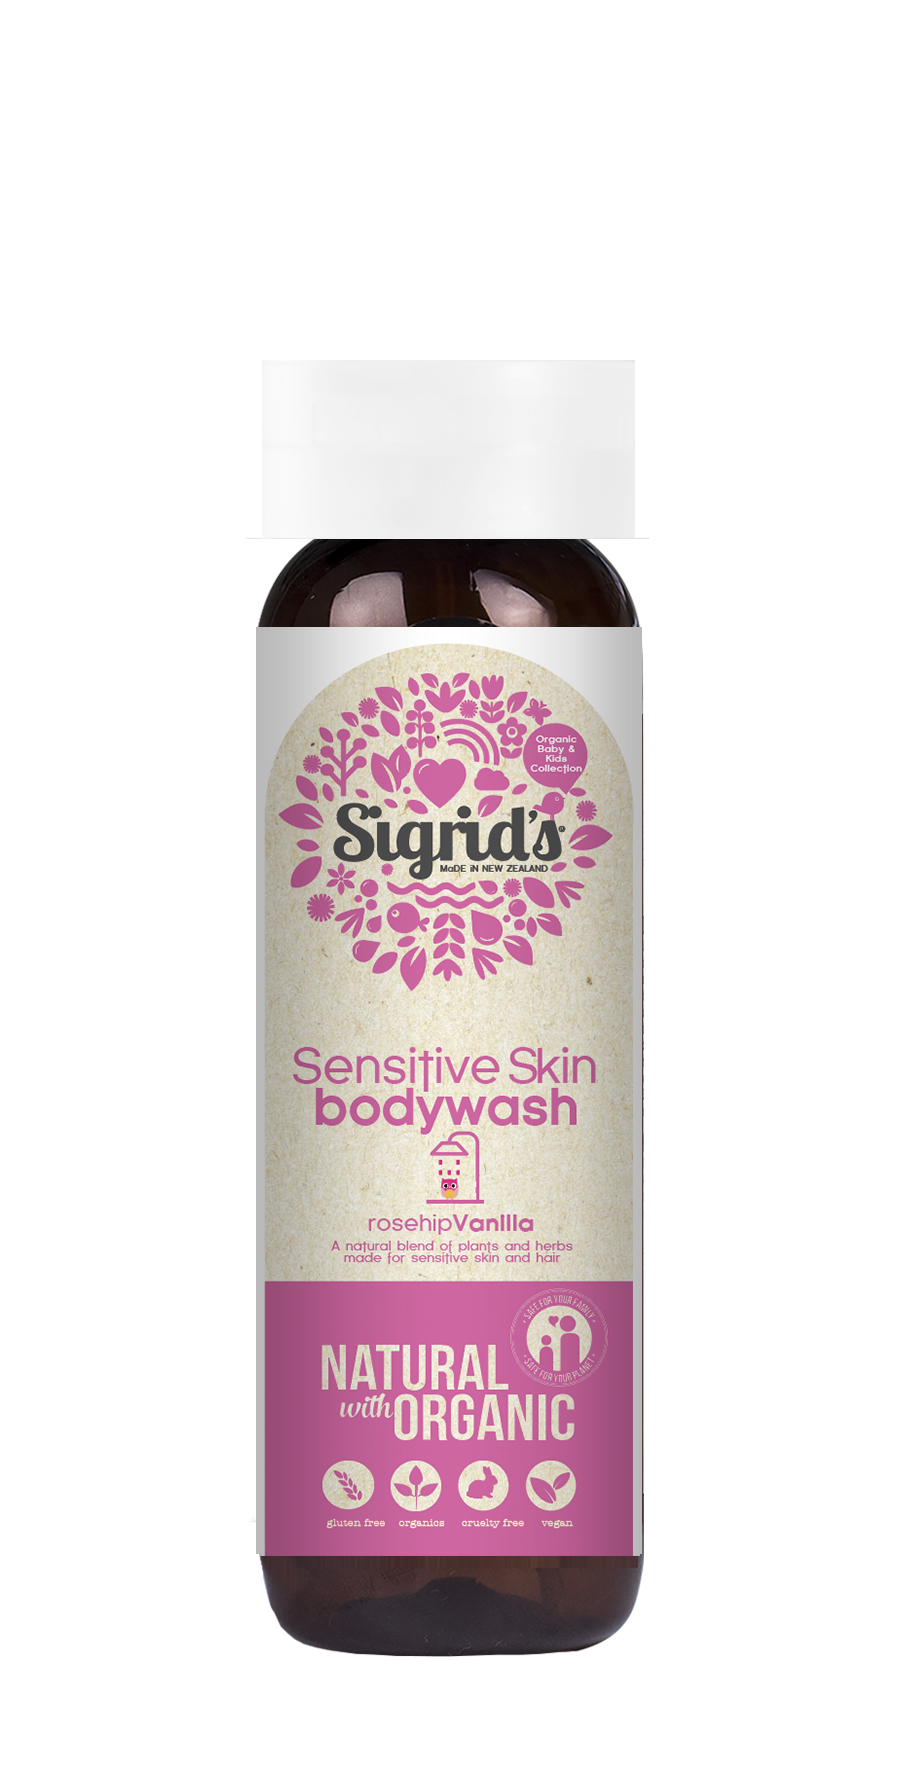 Natural Sensitive skin body wash, with organic extracts